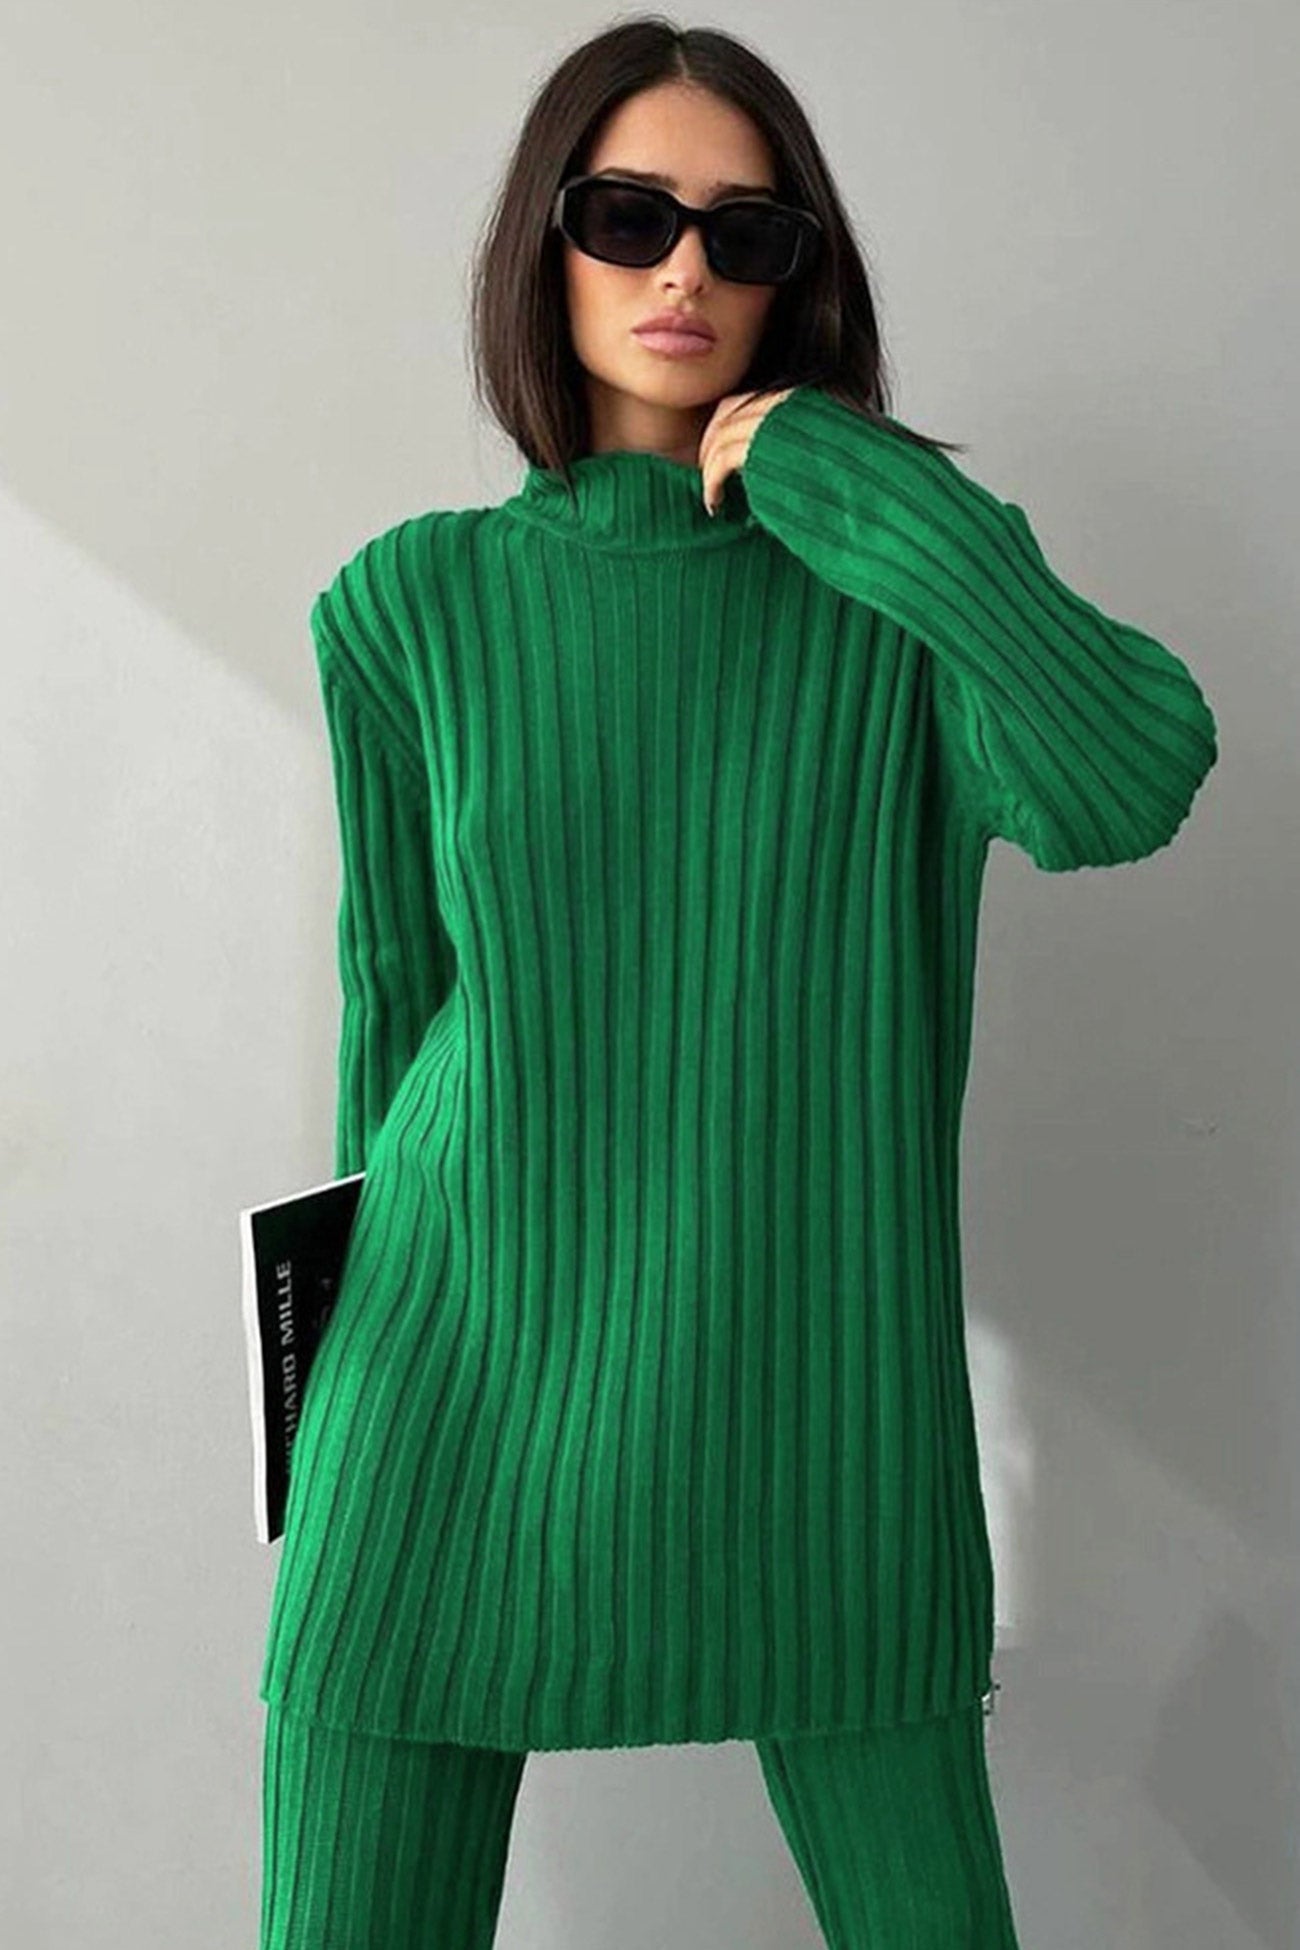 Turtleneck Ribbed Knitted Flare Pants Two-piece Set